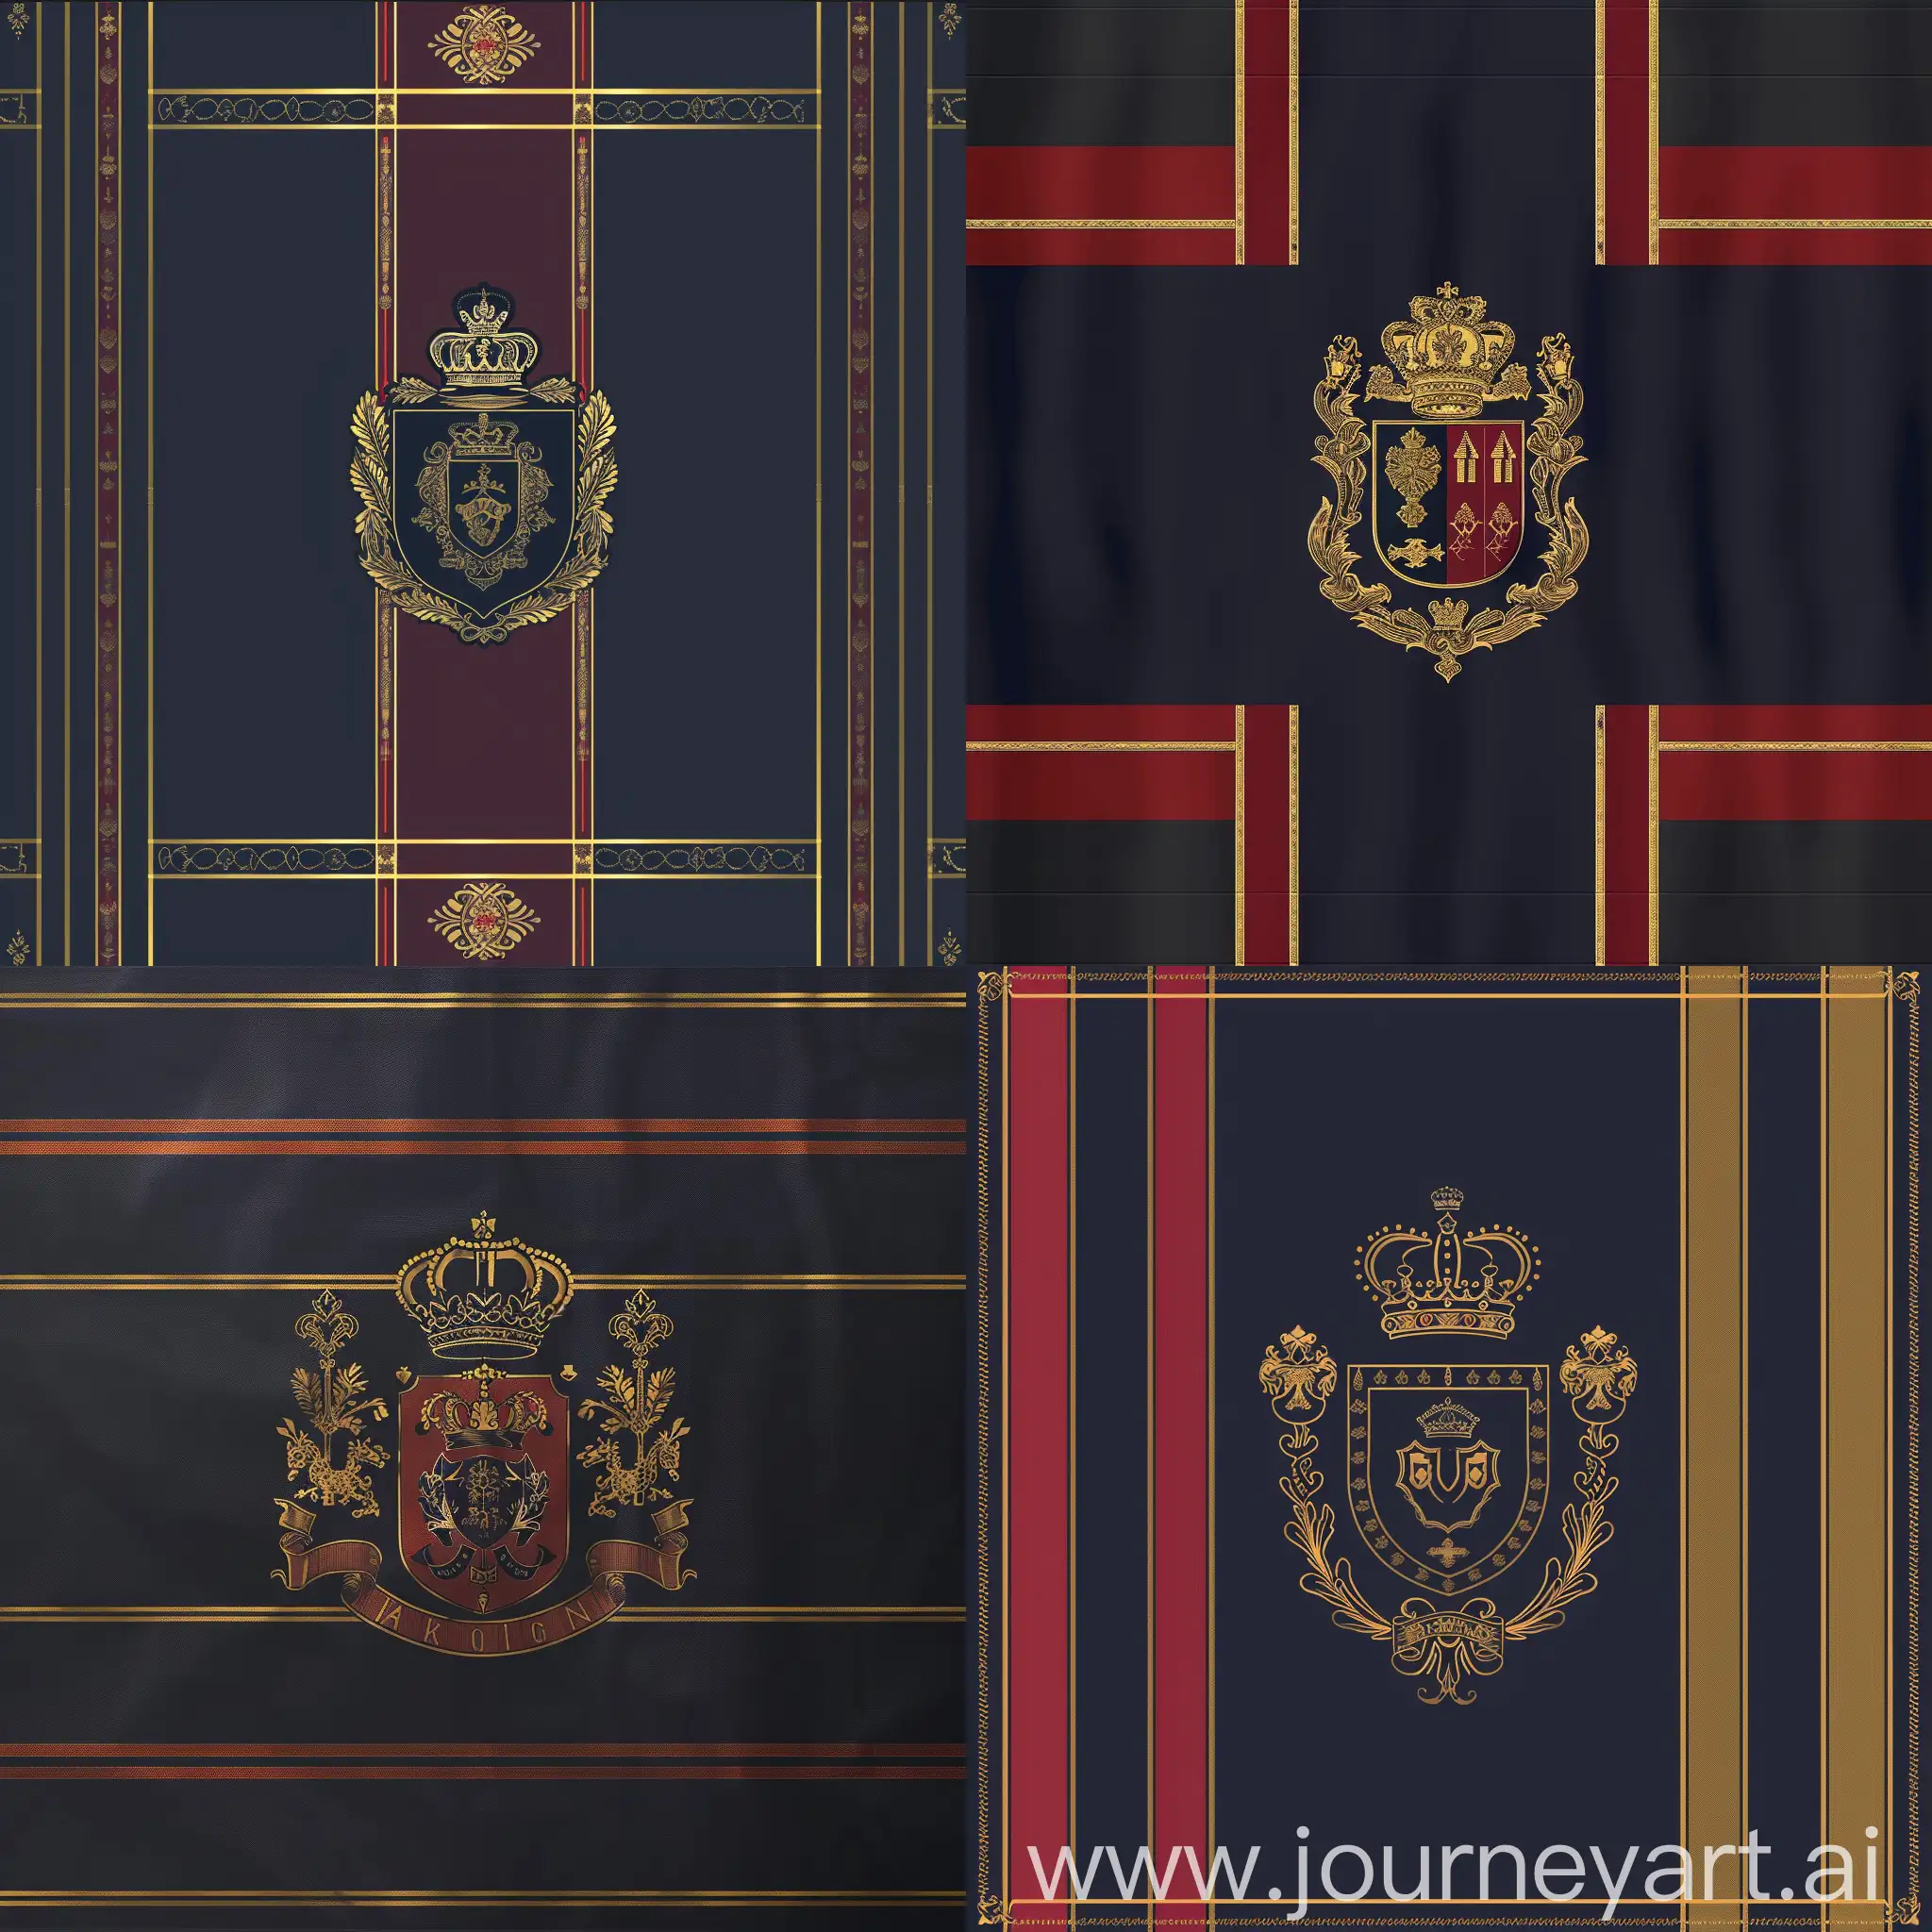 Royal-Flag-with-Golden-Crown-and-Coat-of-Arms-on-Dark-Blue-Background